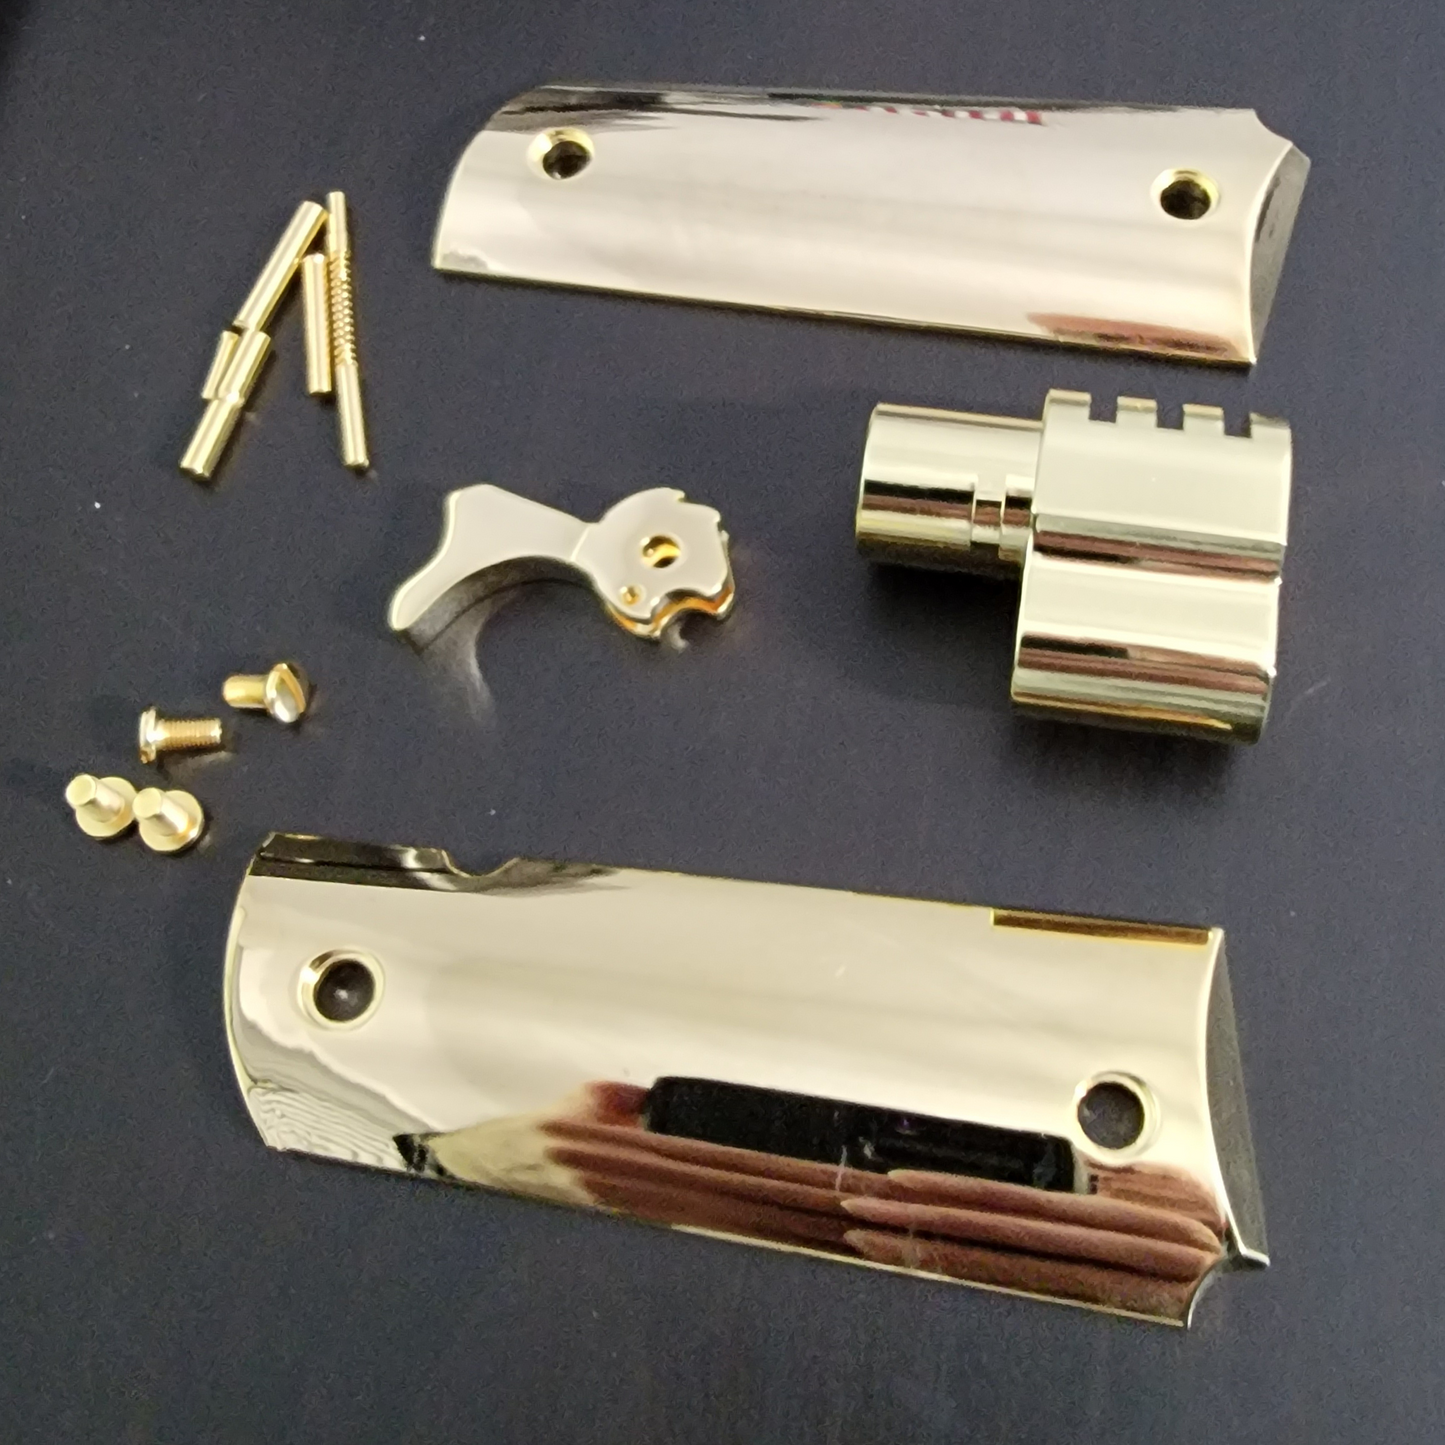 Real 24K Gold Plated 1911 gun parts, Polished 1911 Grips, Hammer, Compensator pins screws